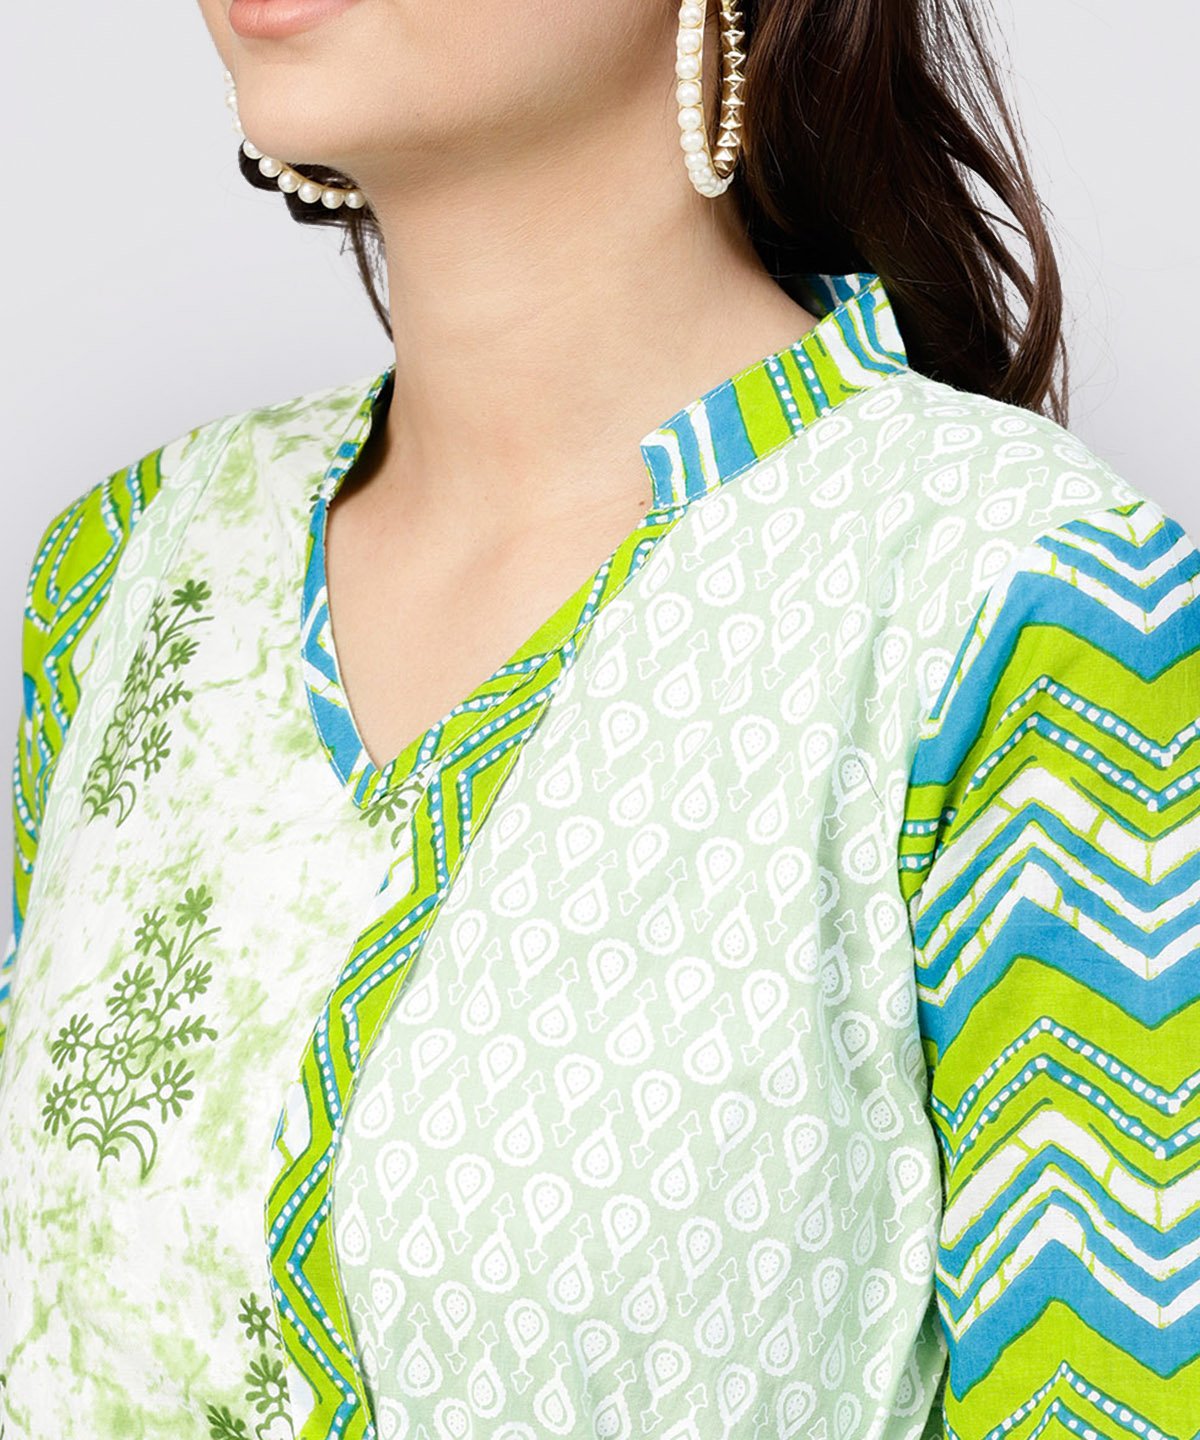 Women's Green Printed Cotton Angrakha Style Dress With  Madarin Collar Emblished With Tassels - Nayo Clothing